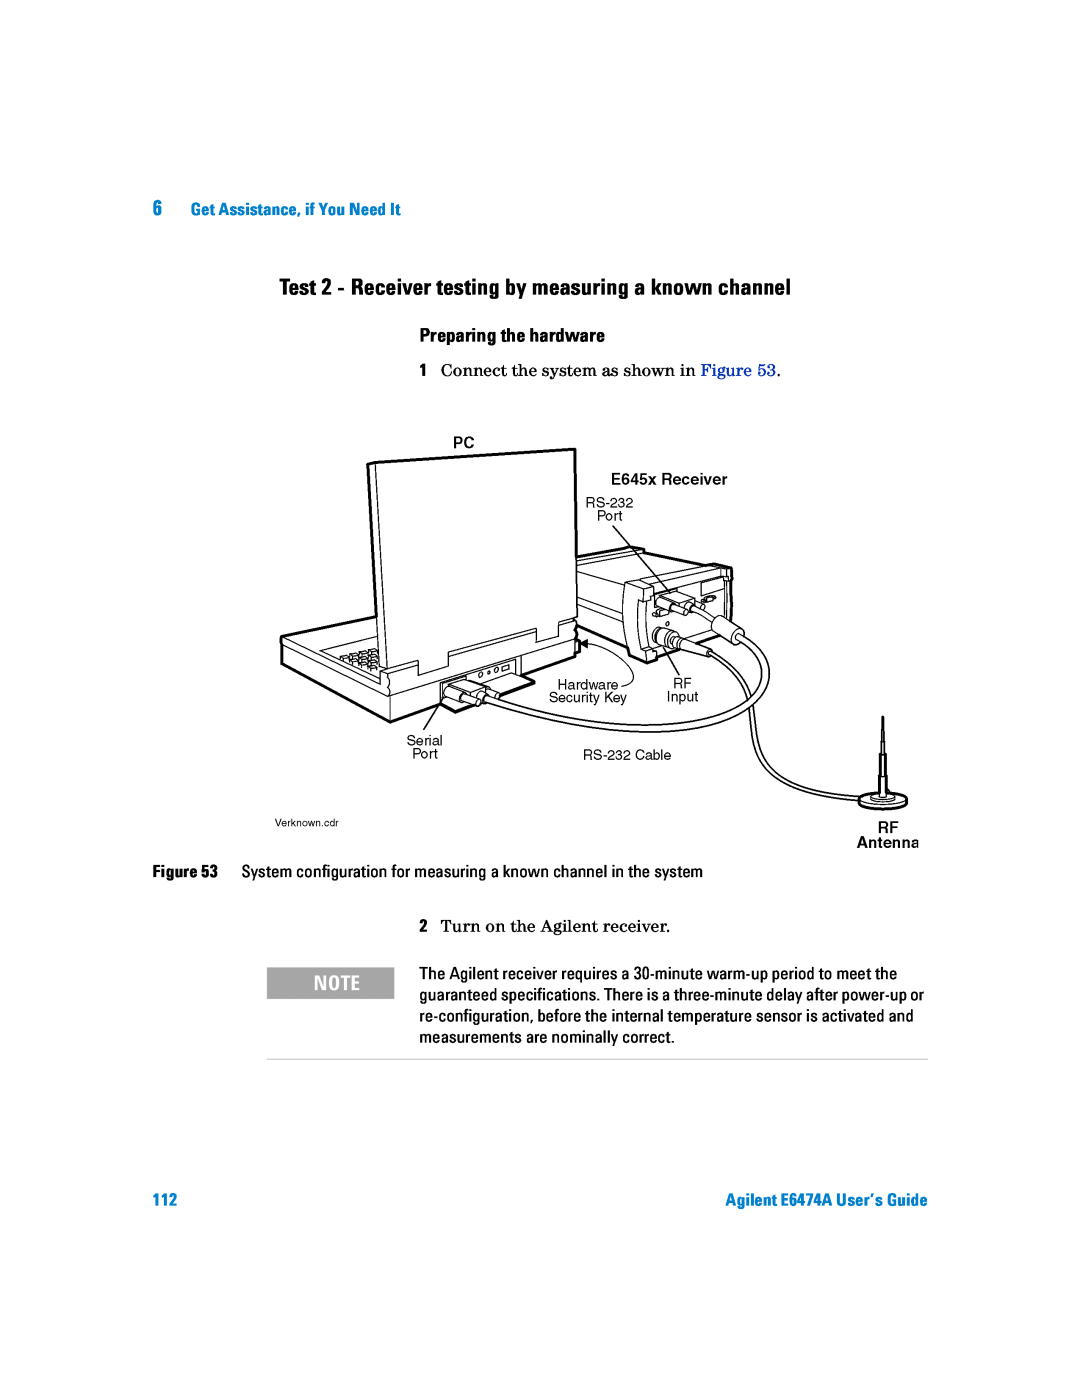 Agilent Technologies Agilent E6474A manual Test 2 - Receiver testing by measuring a known channel, Preparing the hardware 